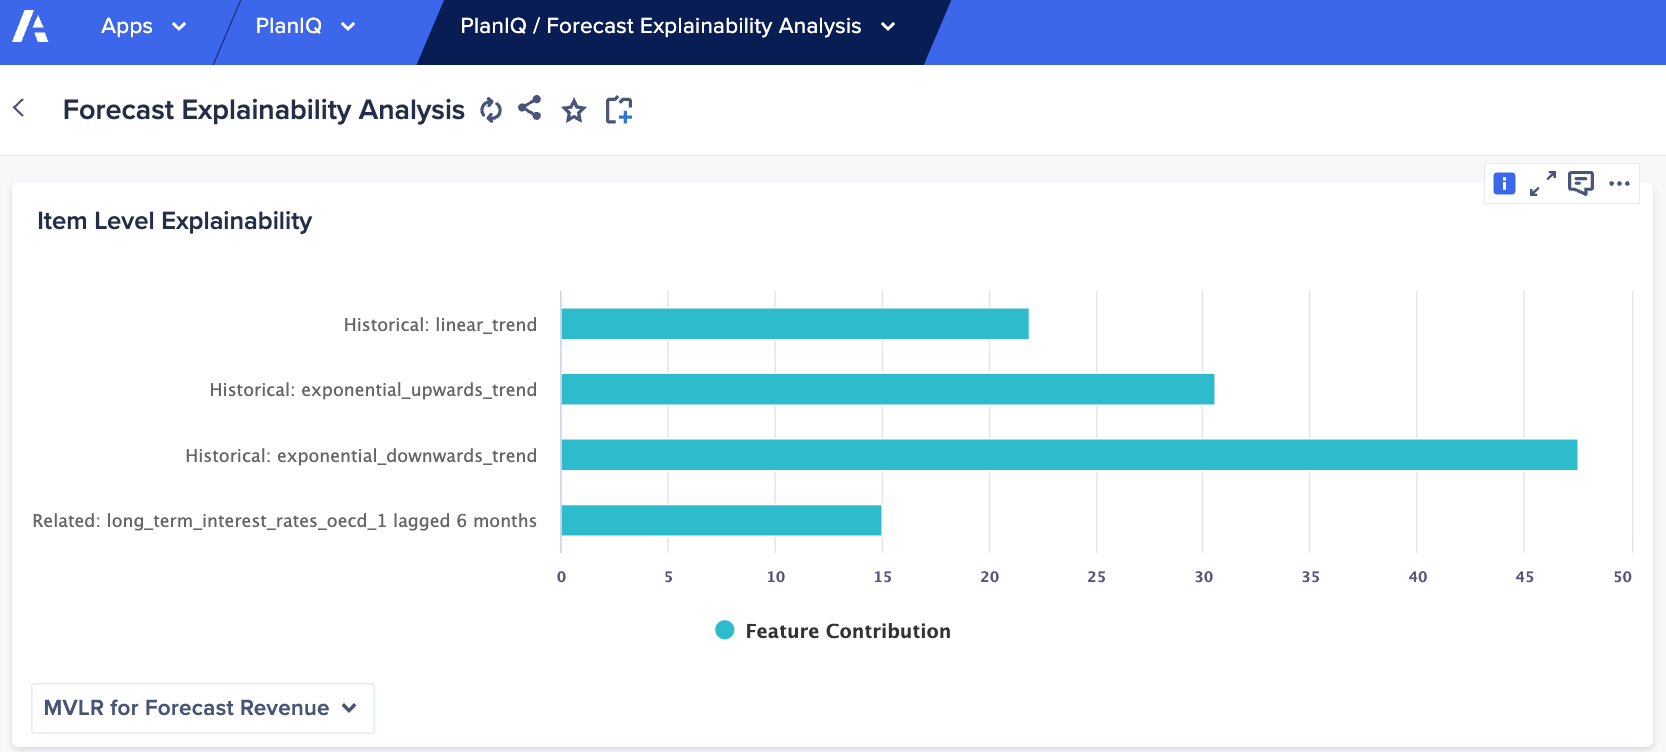 Item level explainability and feature contributions show in a horizontal bar chart.